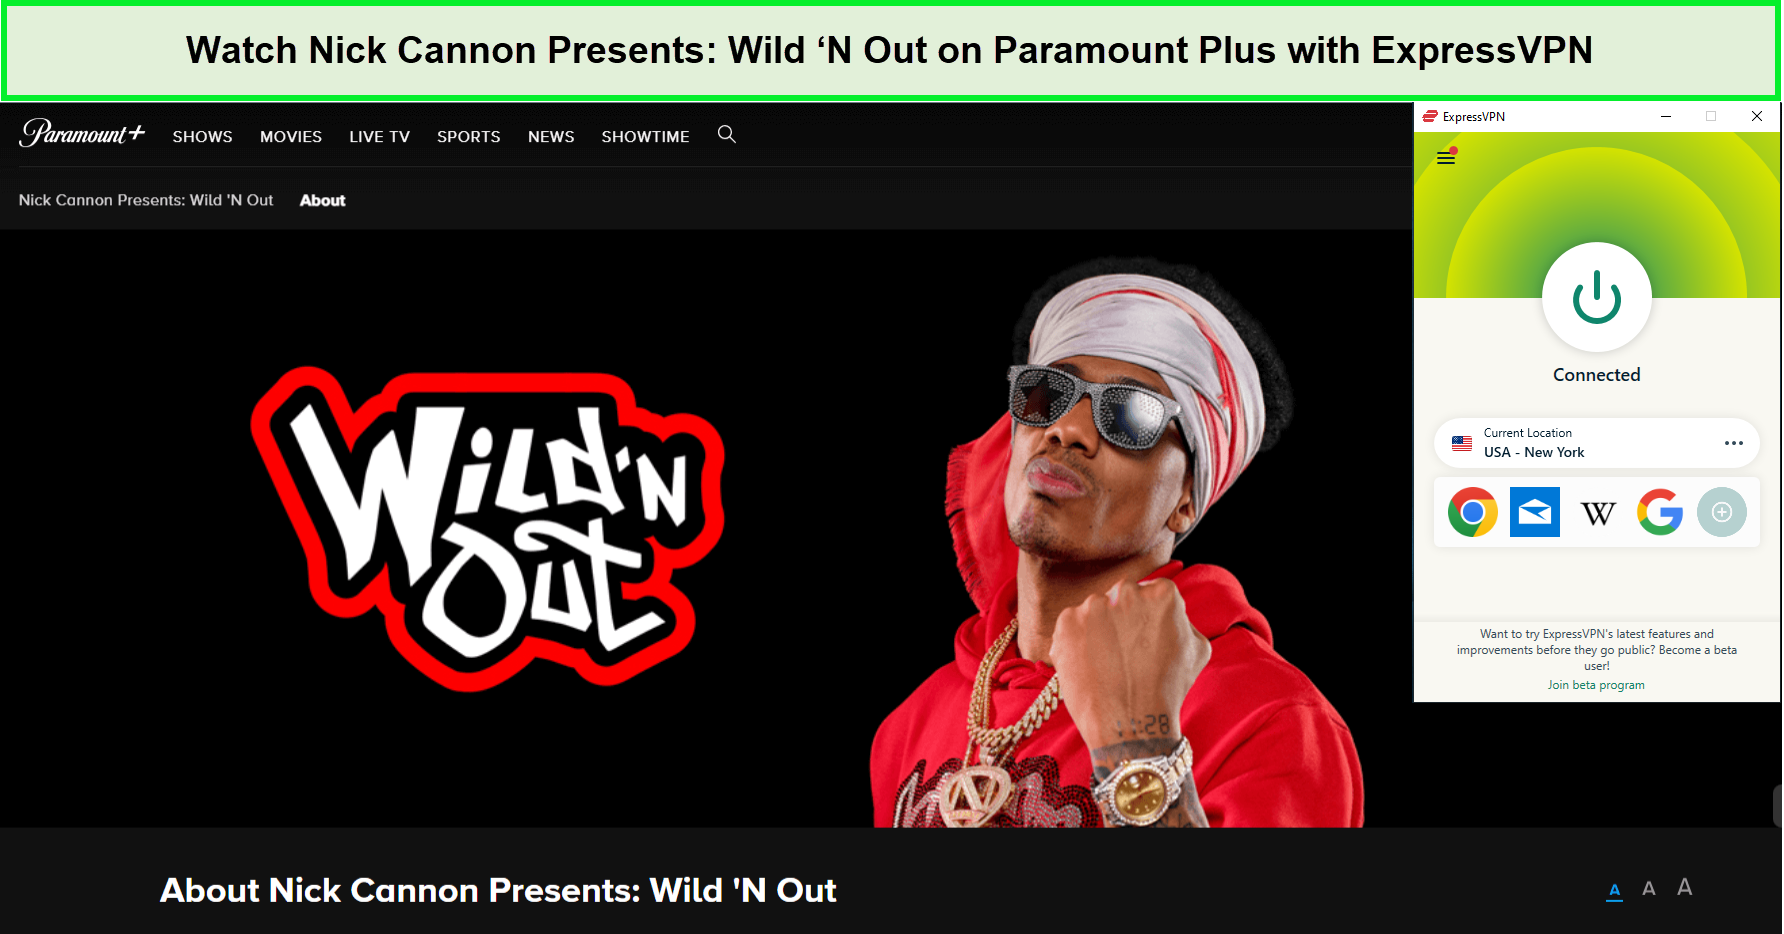 Watch-Nick-Cannon-Presents-Wild-N-Out-in-UK-on-Paramount-Plus-with-ExpressVPN